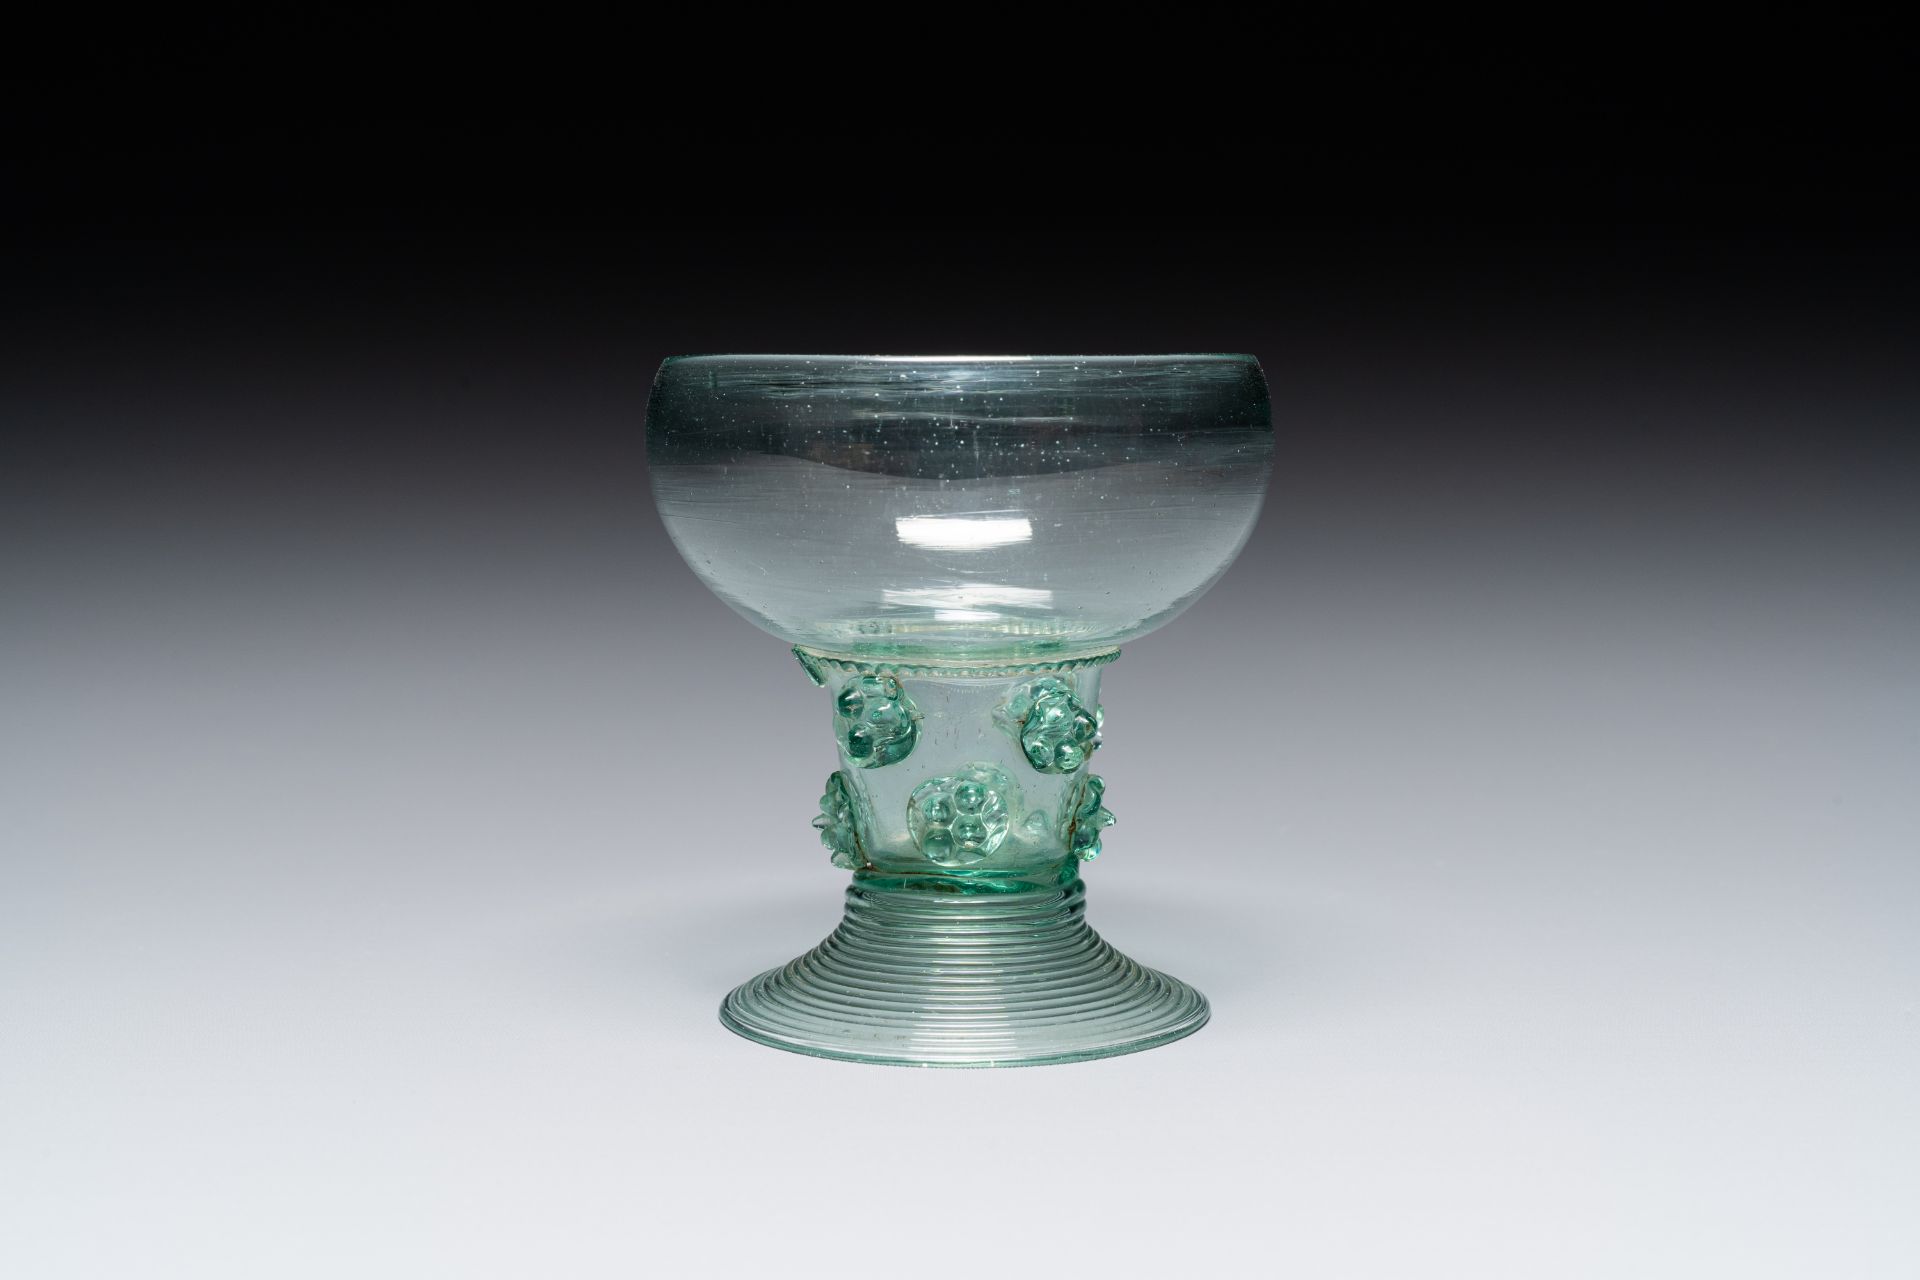 A Dutch or German green glass rummer, 2nd quarter of the 17th C. - Image 2 of 7